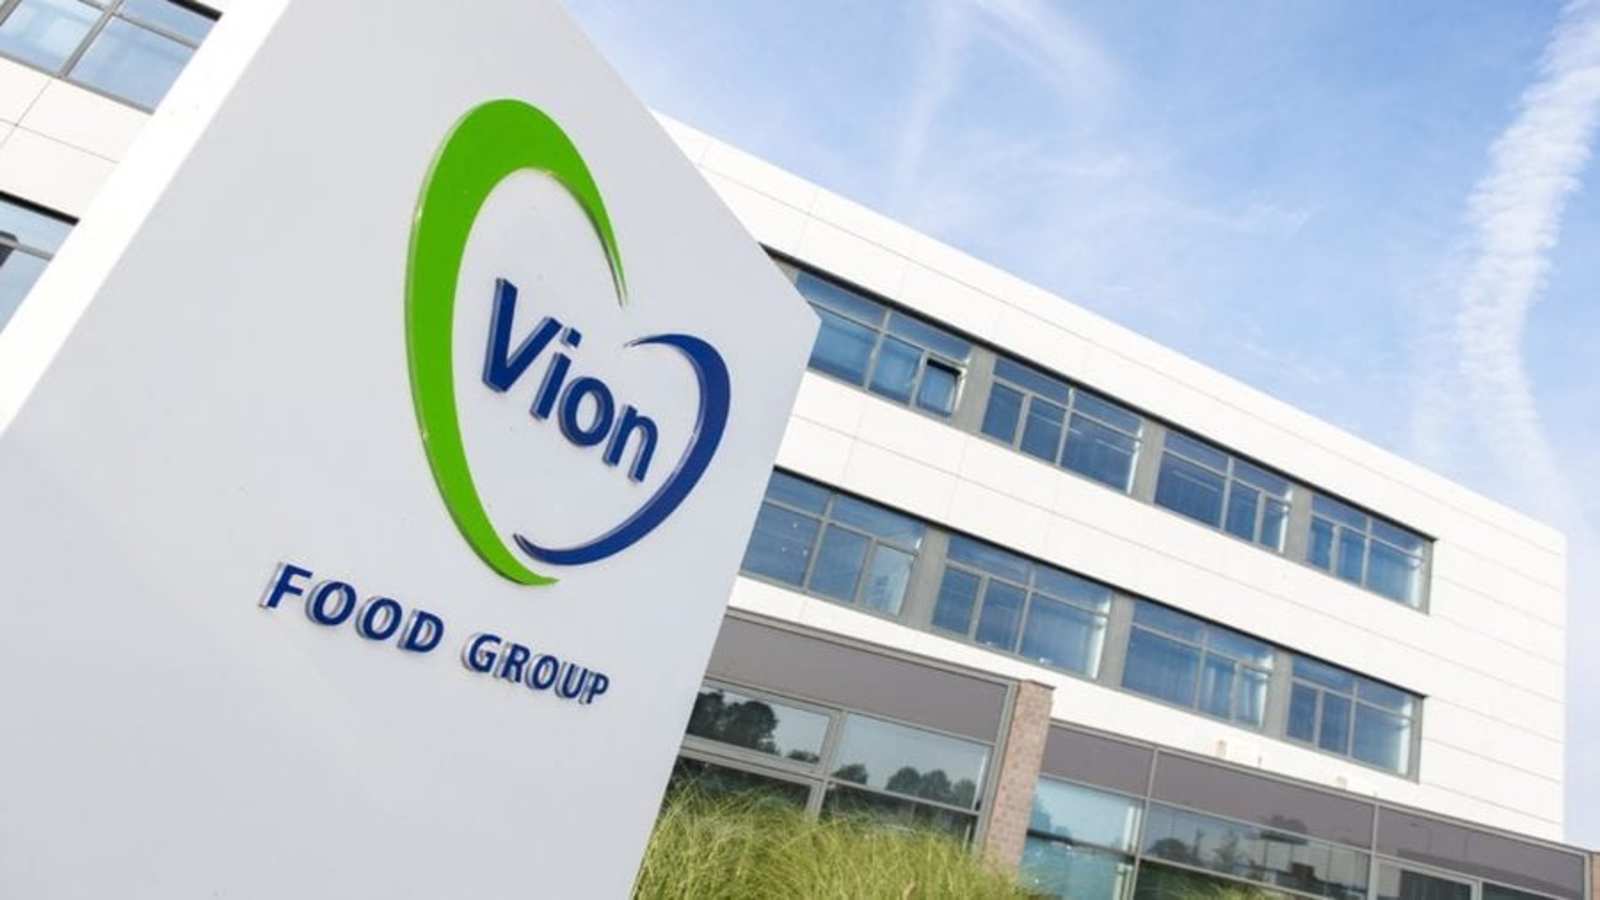 Meat group Vion rejigs business structure to target sustainable growth